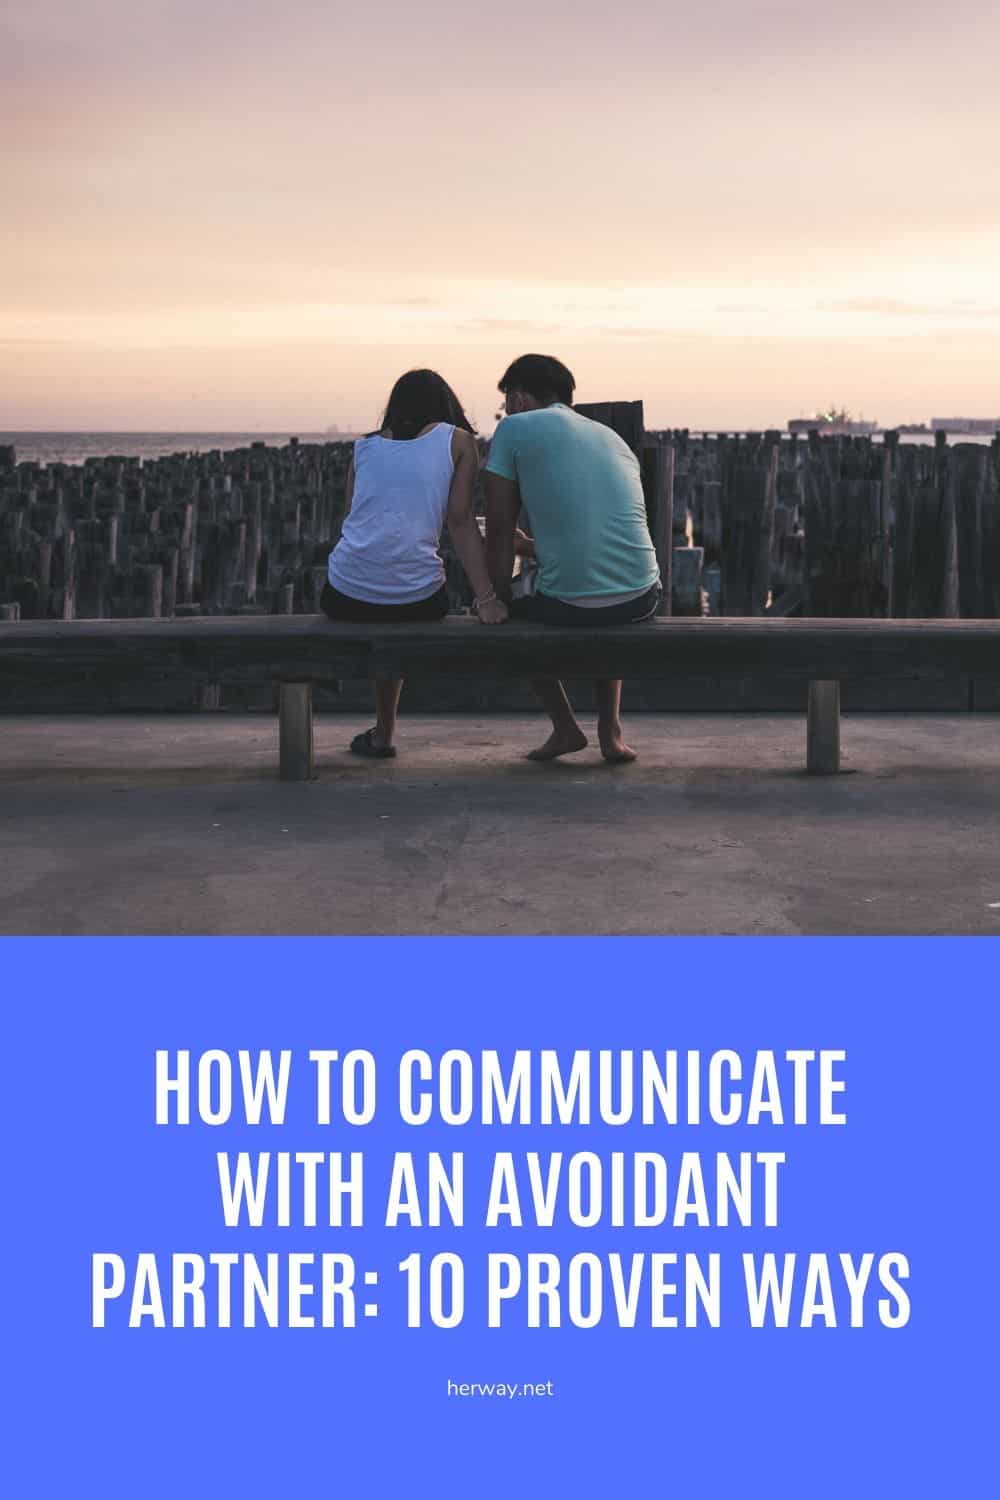 How To Communicate With An Avoidant Partner: 10 Proven Ways